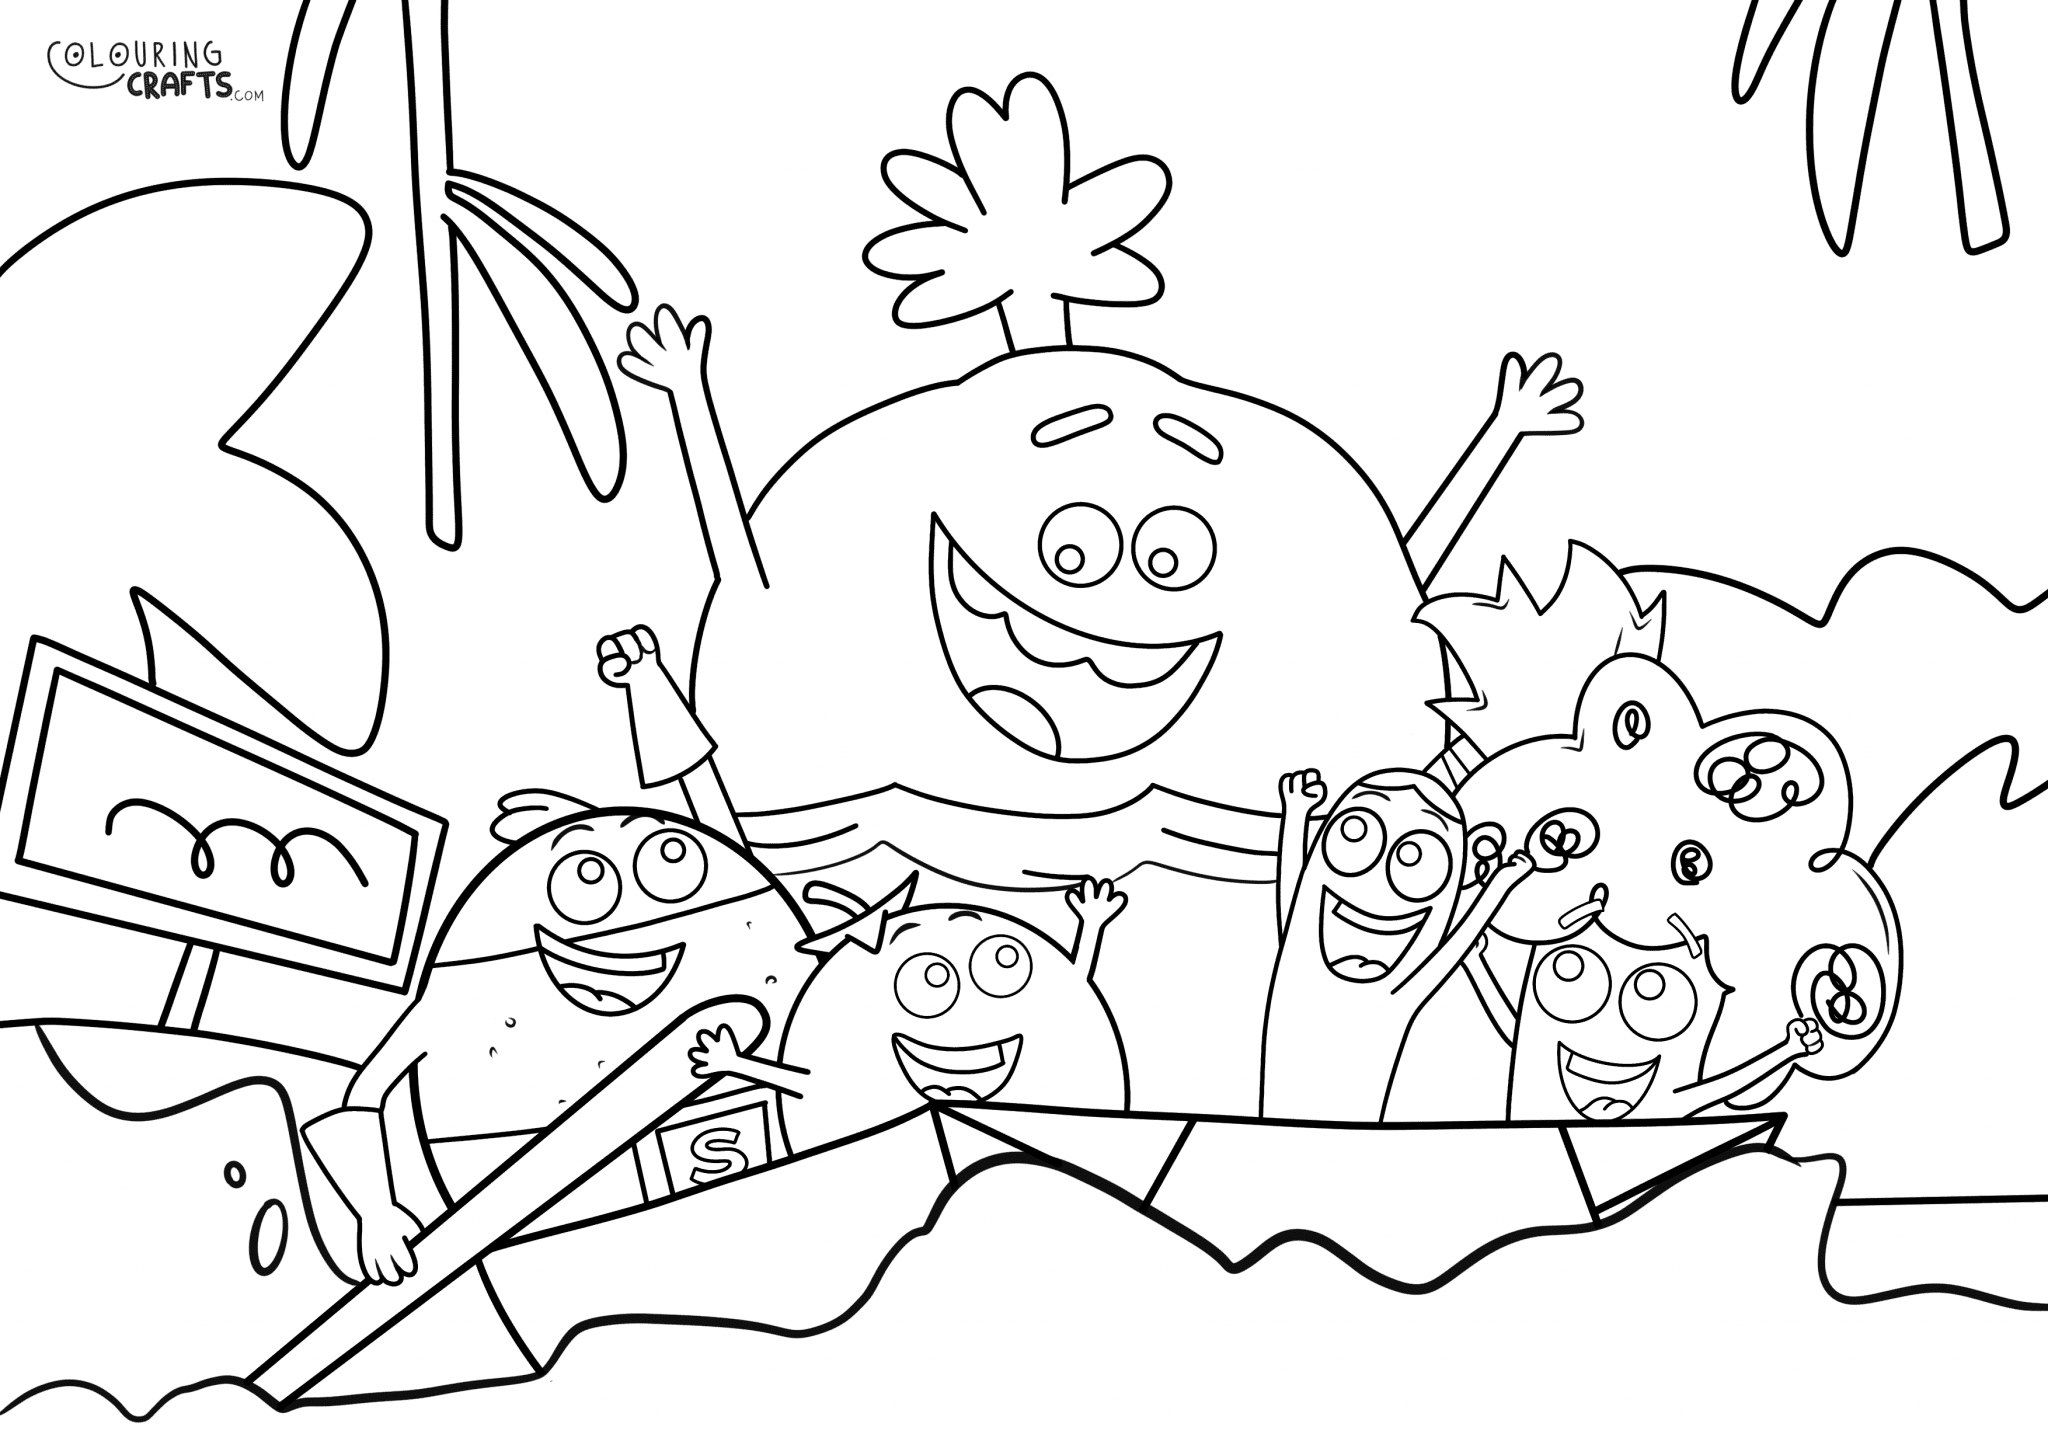 Supertato Characters Colouring Page - Colouring Crafts